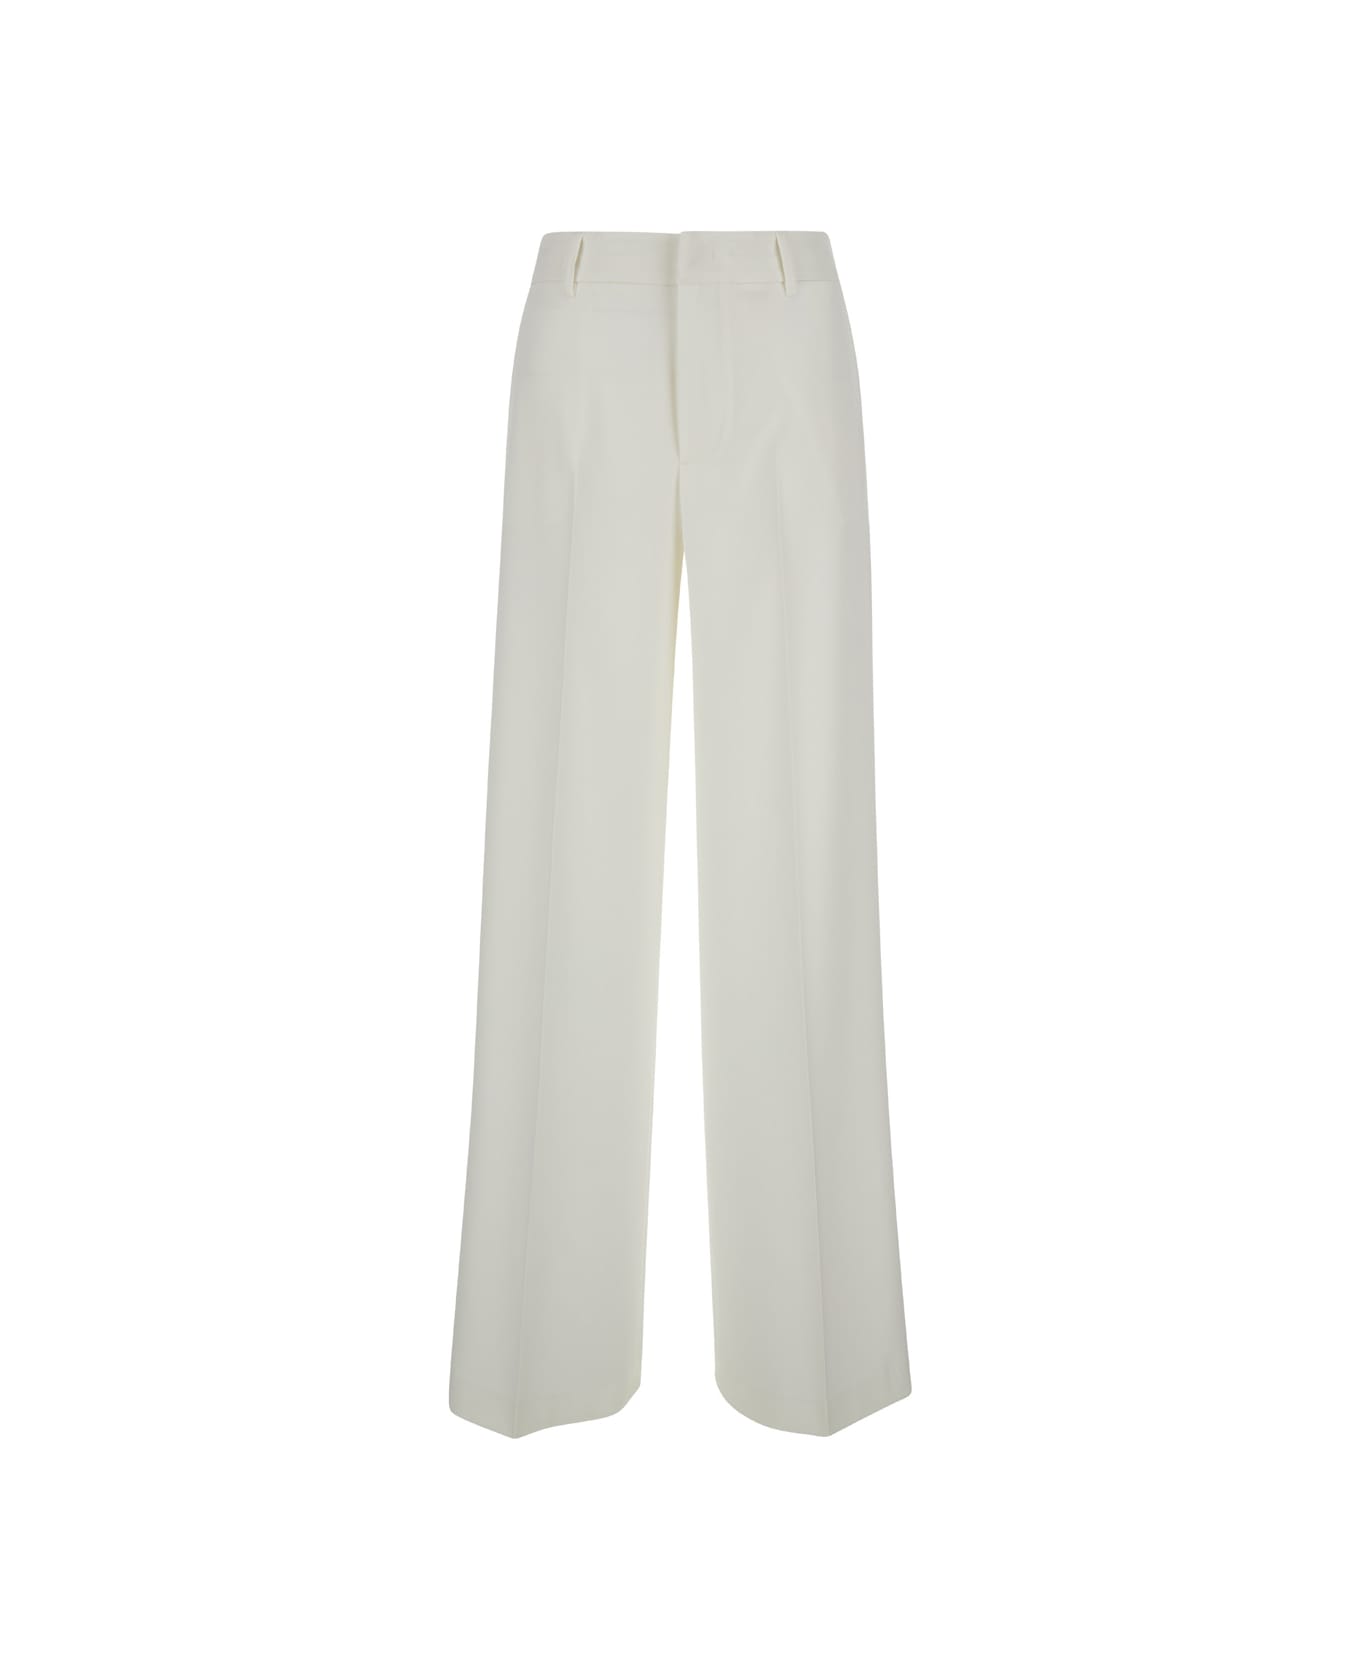 PT Torino Tailored 'lorenza' High Waisted White Trousers In Technical Fabric Woman - bianco